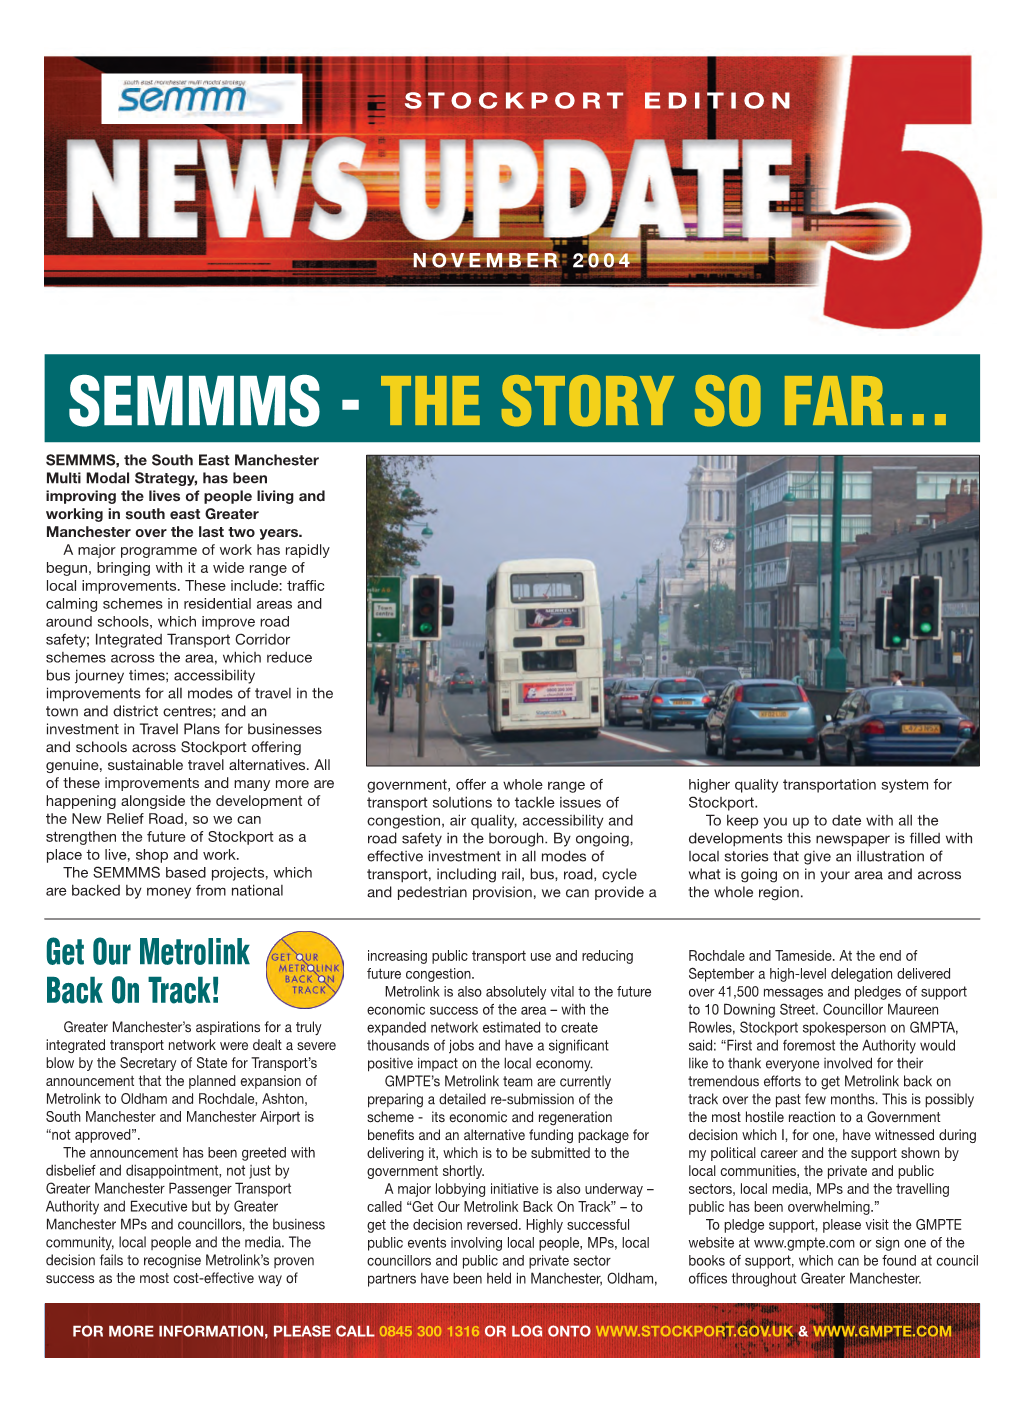 SEMMMS 5 Stockport (Page 2)